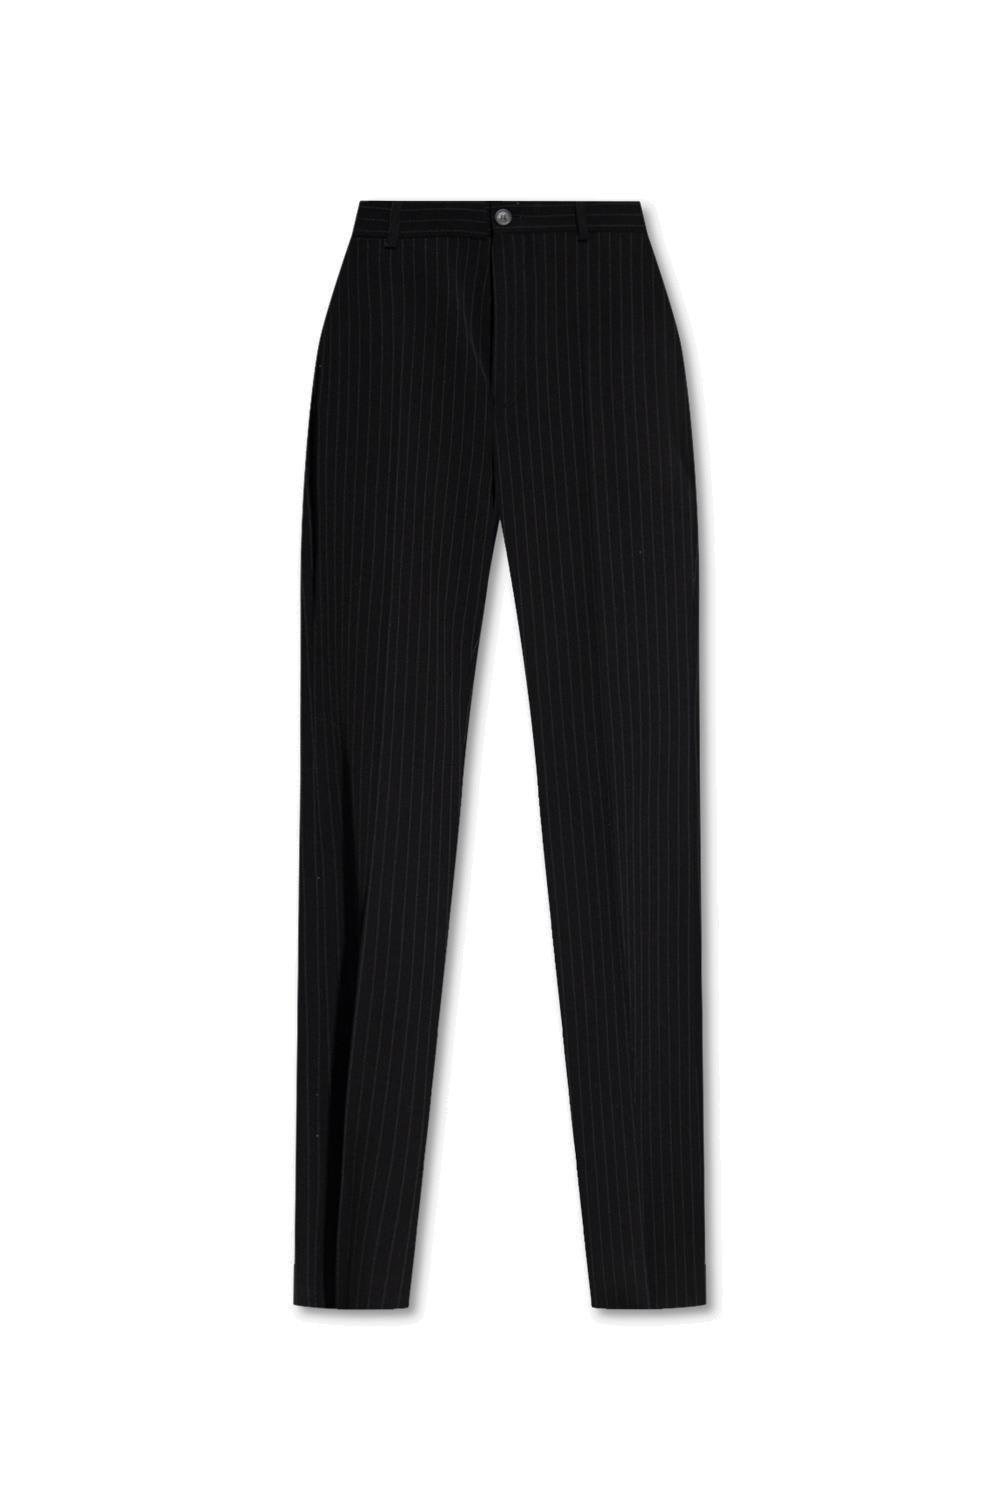 BALENCIAGA PINSTRIPED PLEAT FRONT TROUSERS